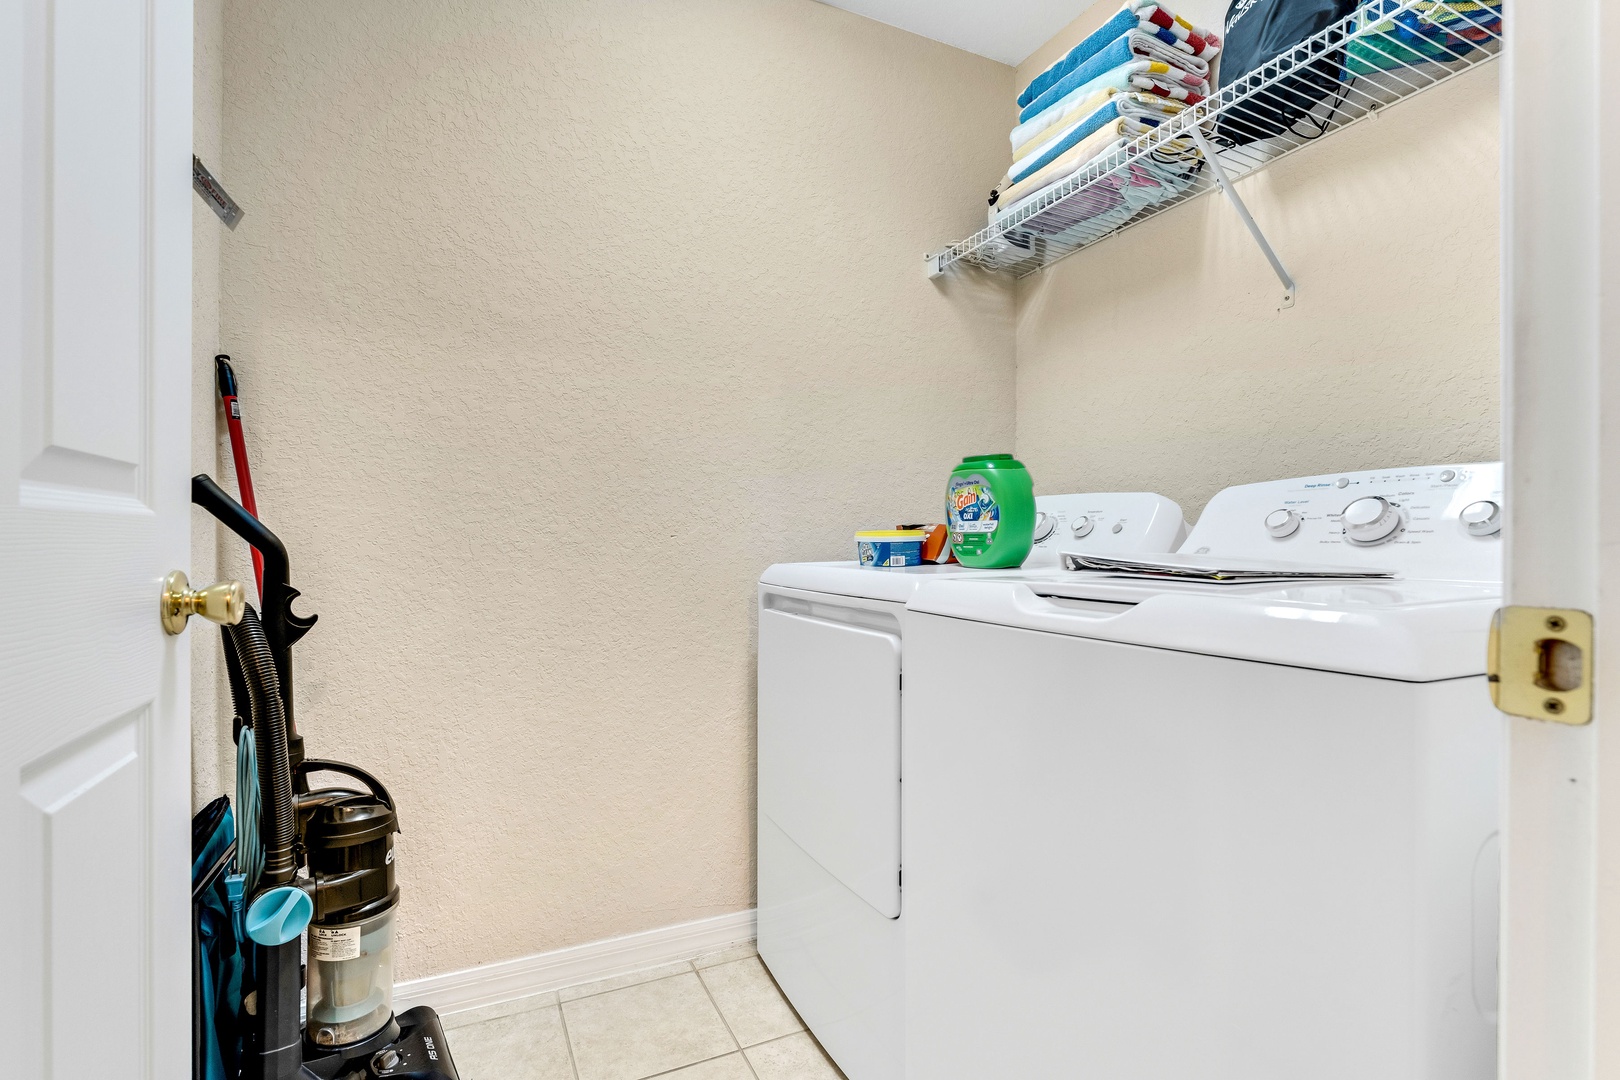 Private laundry is available for your stay, tucked away near the entry